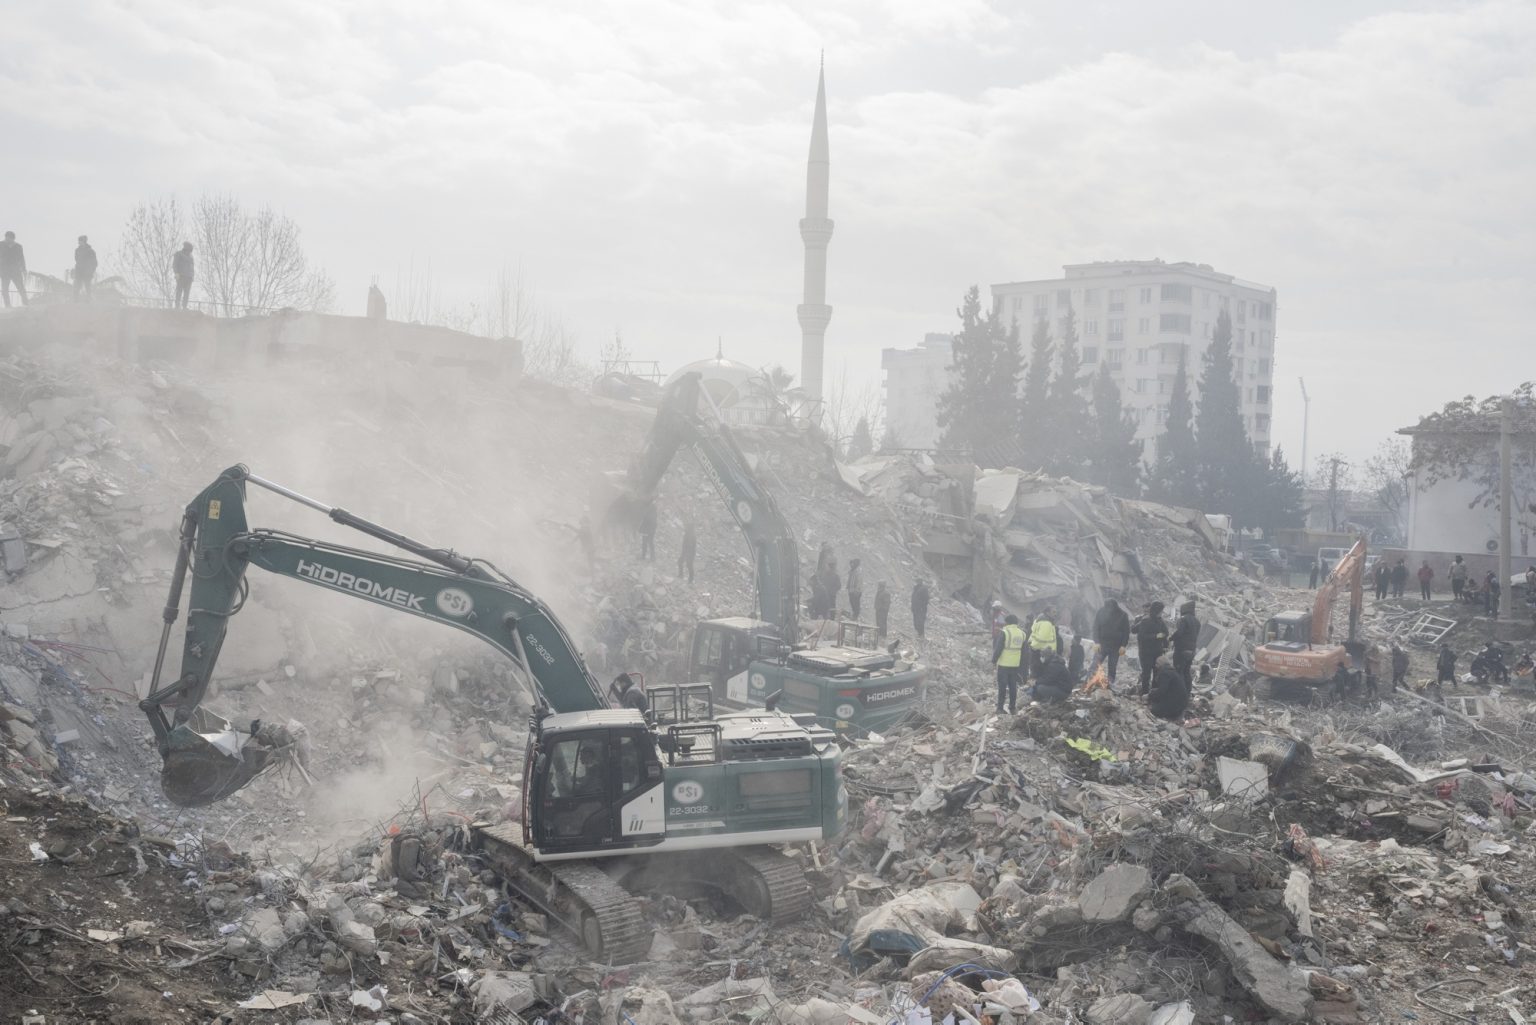 Kahramanmaras¸, Turkey, February 2023 - The aftermath of the earthquake that hit southern Turkey and northern Syria.     Bulldozers working to remove rubble in search of survivors.><
Kahramanmaras¸, Turchia, febbraio 2023  Le conseguenze del terremoto che ha colpito la Turchia del Sud e la Siria del nord.